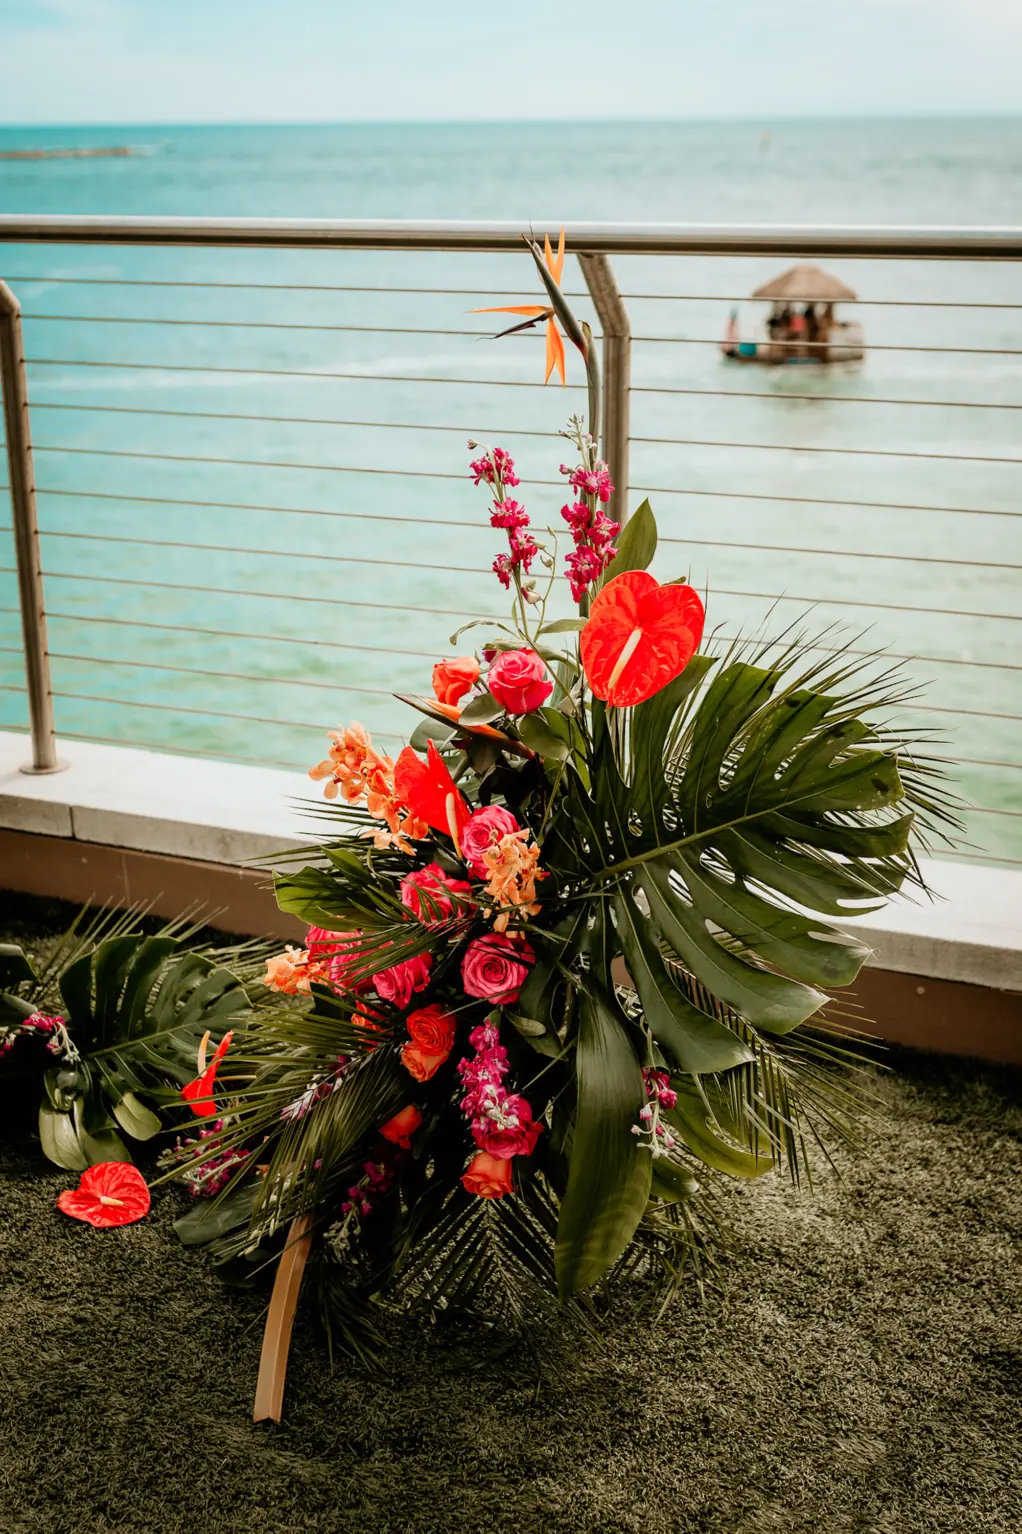 Tropical Monstera Leaves and Bright Tropical Florals | Wedding Ceremony Decor Inspiration | Clearwater Florist Save the Date Florida